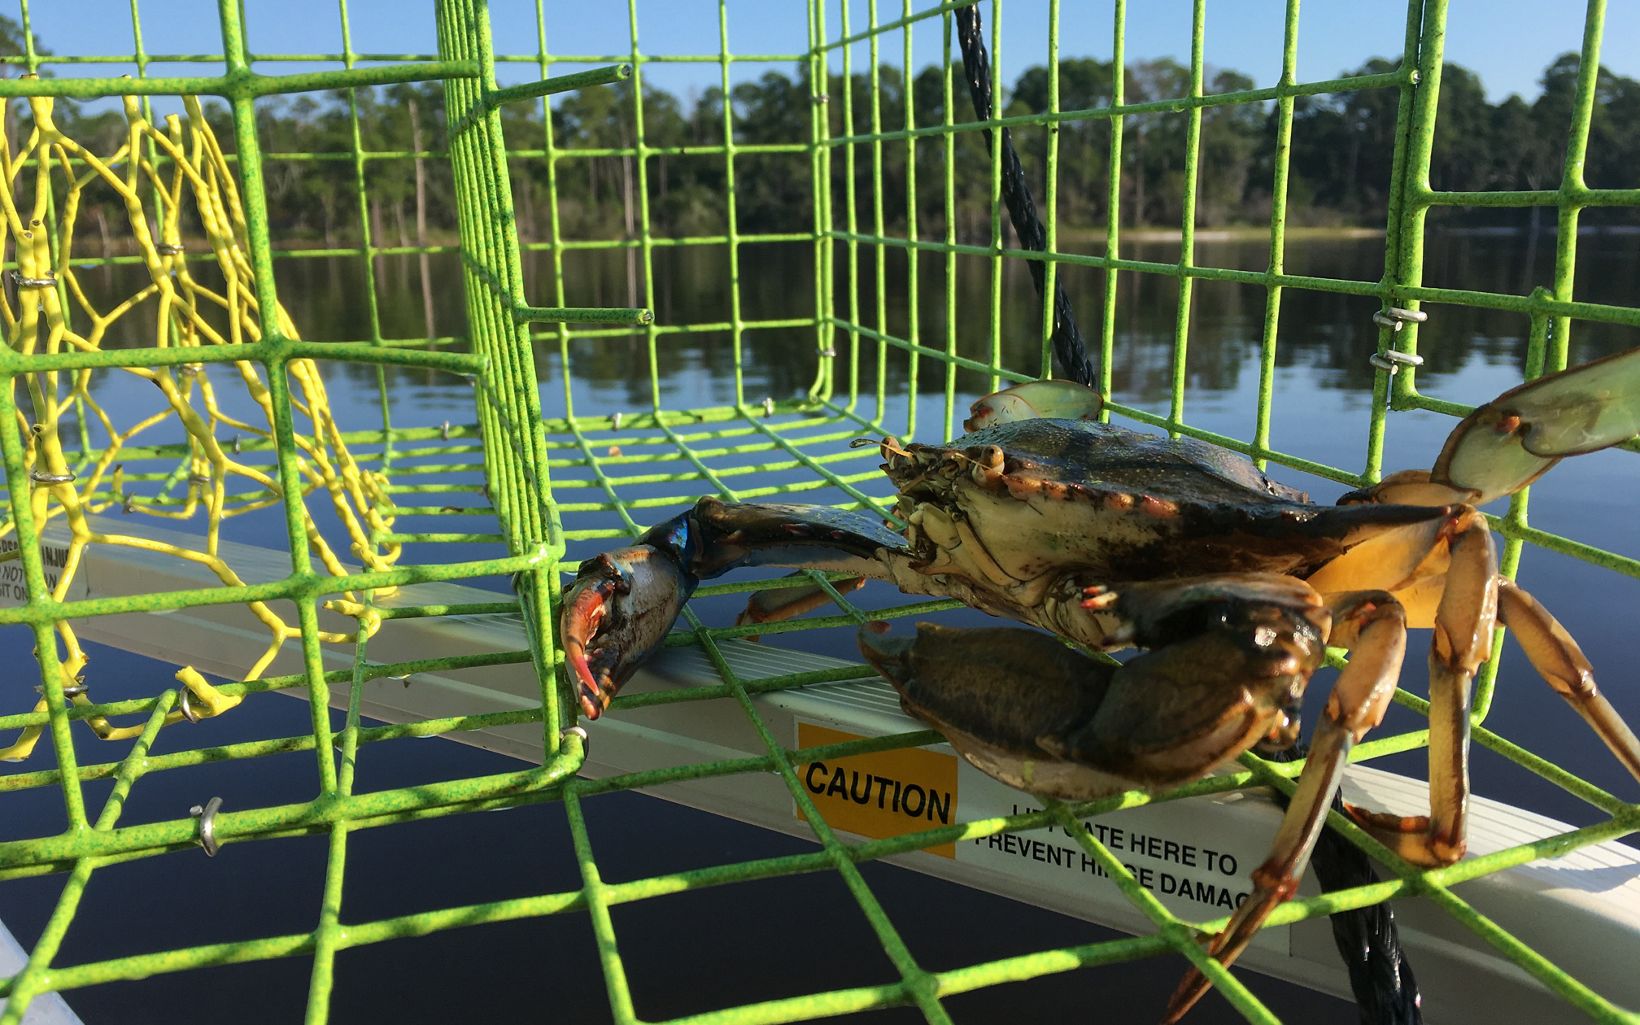 Blue Crab Blue Crab caught in a trap for monitoring prior to reef construction (the crab was released alive!) © WSP